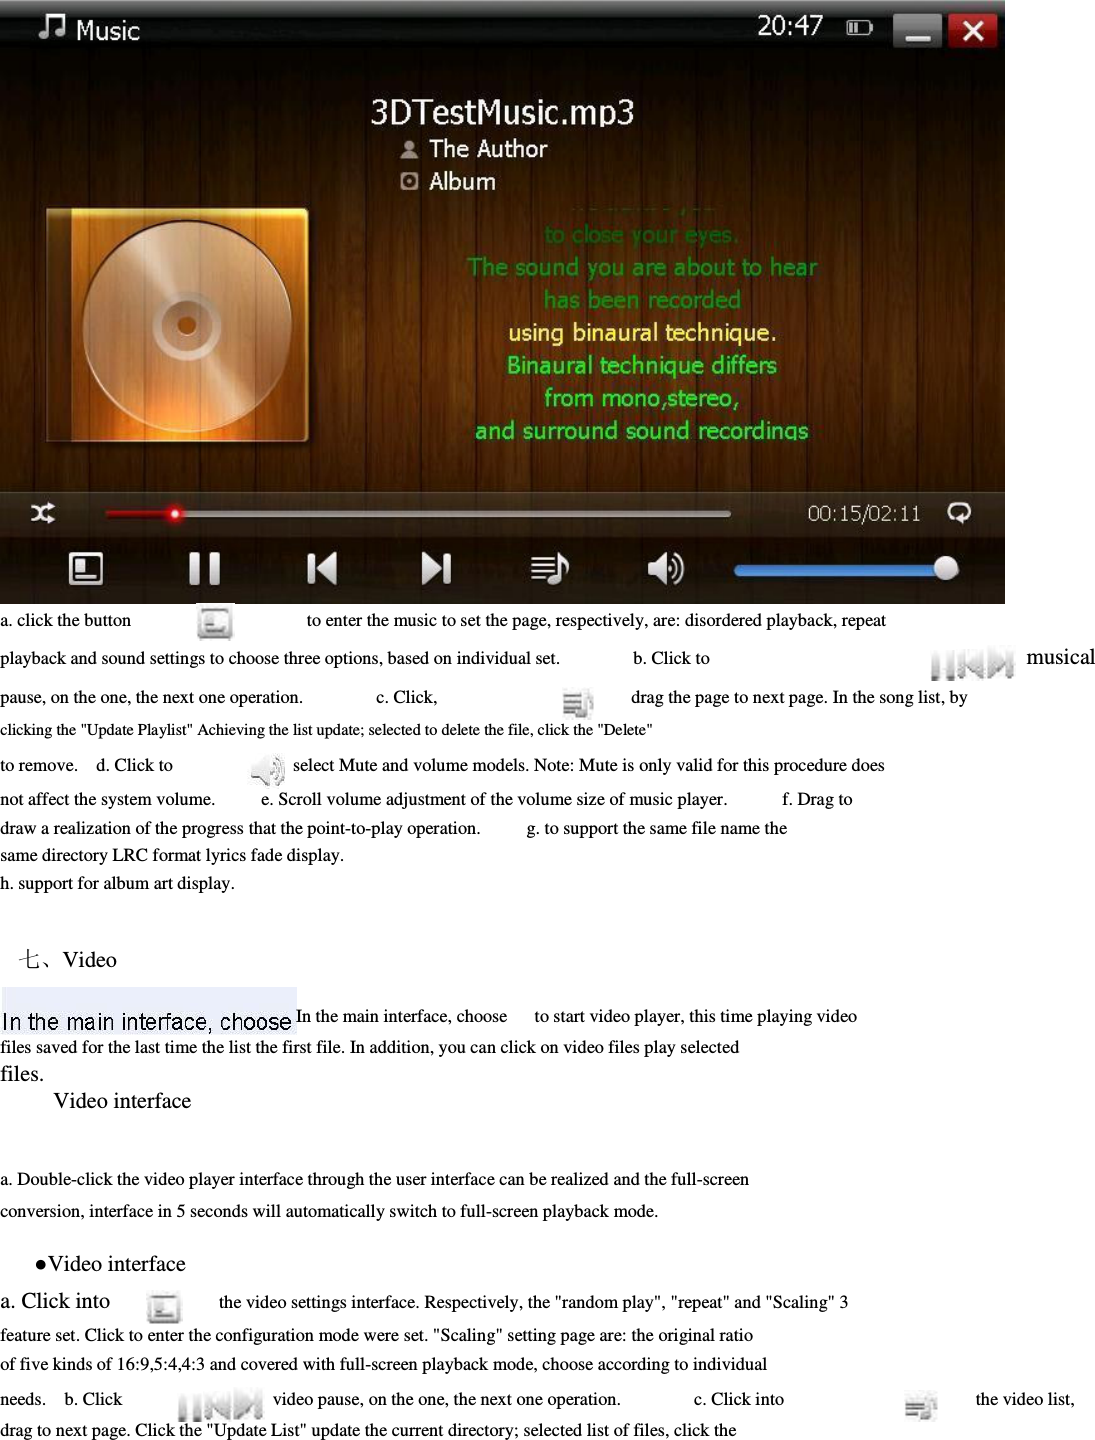                             a. click the button                                             to enter the music to set the page, respectively, are: disordered playback, repeat     playback and sound settings to choose three options, based on individual set.                b. Click to pause, on the one, the next one operation.                c. Click,                  drag the page to next page. In the song list, by               clicking the &quot;Update Playlist&quot; Achieving the list update; selected to delete the file, click the &quot;Delete&quot;         to remove.    d. Click to          select Mute and volume models. Note: Mute is only valid for this procedure does               not affect the system volume.          e. Scroll volume adjustment of the volume size of music player.            f. Drag to   draw a realization of the progress that the point-to-play operation.          g. to support the same file name the same directory LRC format lyrics fade display.               h. support for album art display.                     七、Video      In the main interface, choose      to start video player, this time playing video         files saved for the last time the list the first file. In addition, you can click on video files play selected       files.   Video interface       a. Double-click the video player interface through the user interface can be realized and the full-screen         conversion, interface in 5 seconds will automatically switch to full-screen playback mode.                  ●Video interface     a. Click into          the video settings interface. Respectively, the &quot;random play&quot;, &quot;repeat&quot; and &quot;Scaling&quot; 3         feature set. Click to enter the configuration mode were set. &quot;Scaling&quot; setting page are: the original ratio of five kinds of 16:9,5:4,4:3 and covered with full-screen playback mode, choose according to individual           musical     needs.    b. Click      video pause, on the one, the next one operation.                c. Click into                the video list,           drag to next page. Click the &quot;Update List&quot; update the current directory; selected list of files, click the         